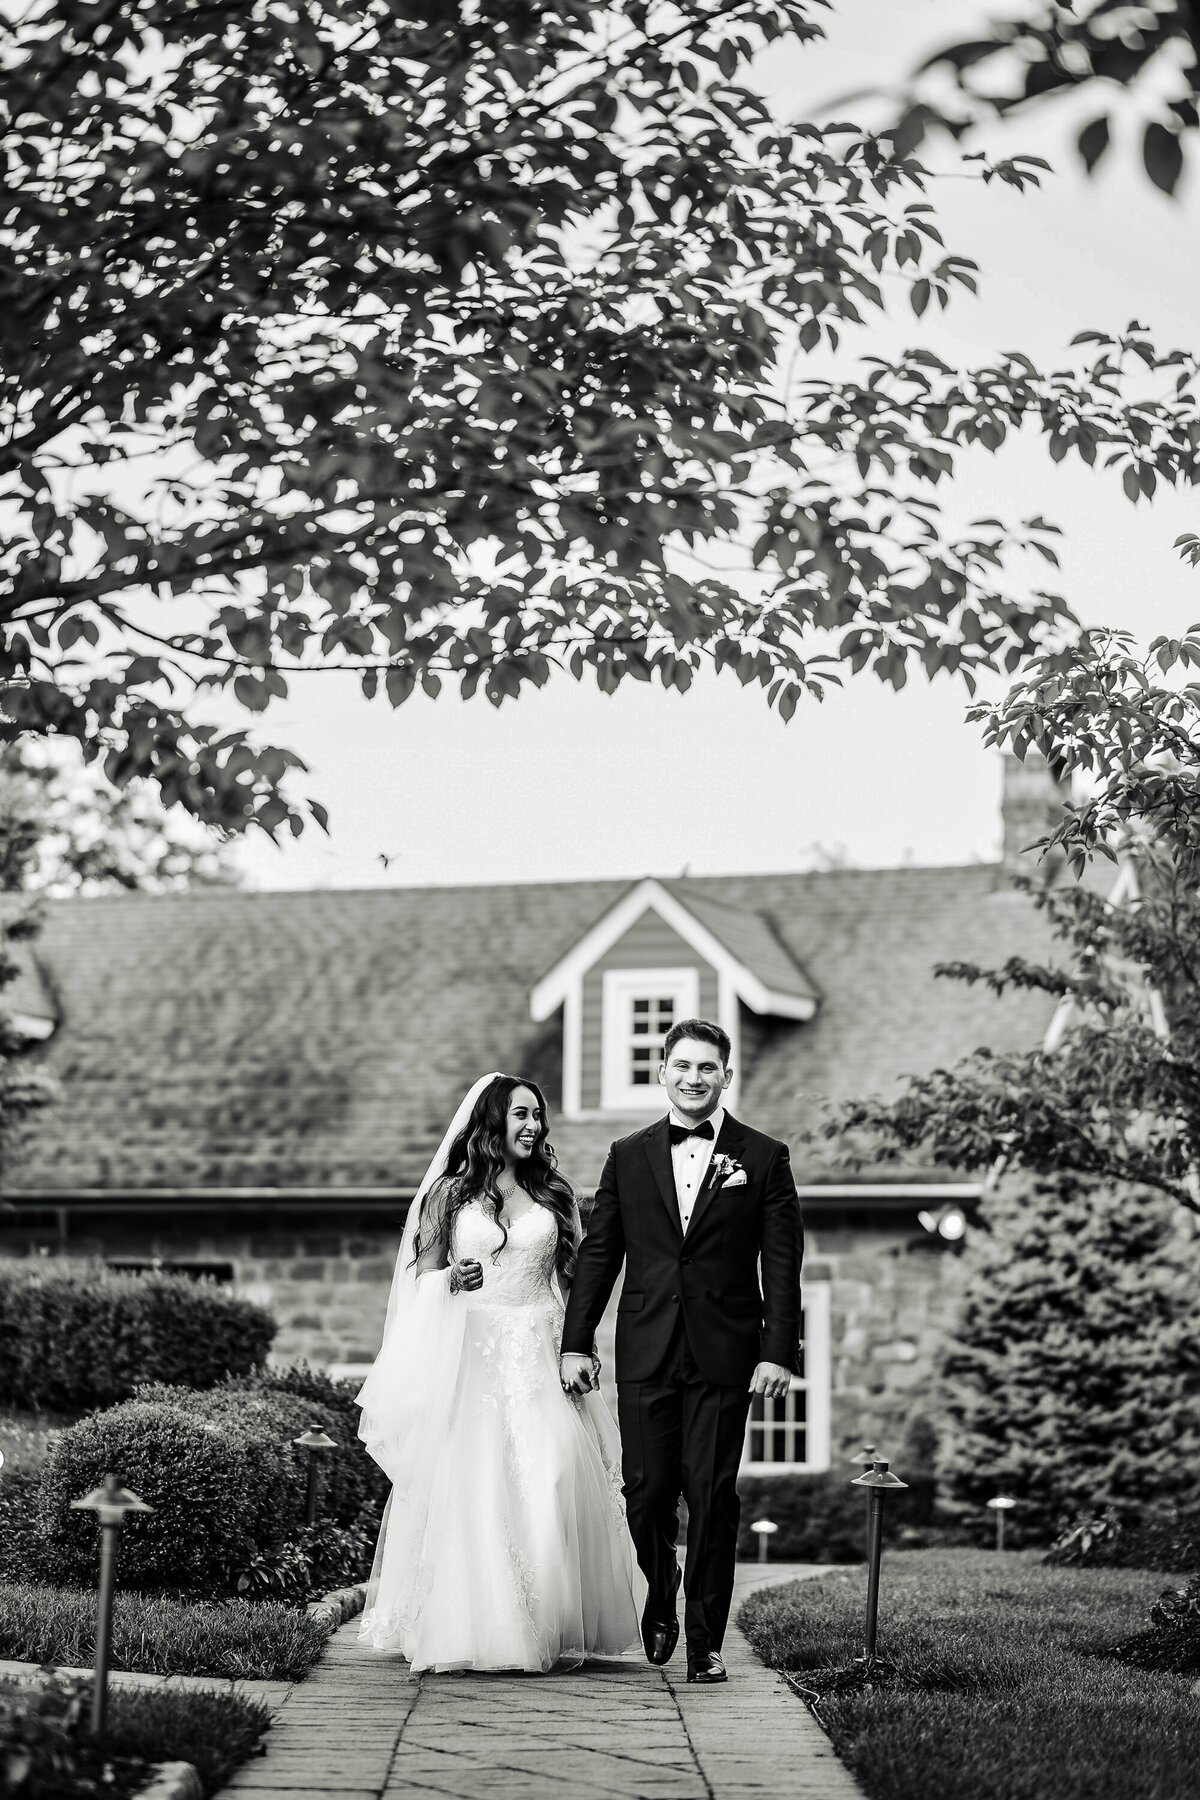 Ishan Fotografi is NJ's top-rated wedding photographer in Princeton. Contact us today for a free consultation.